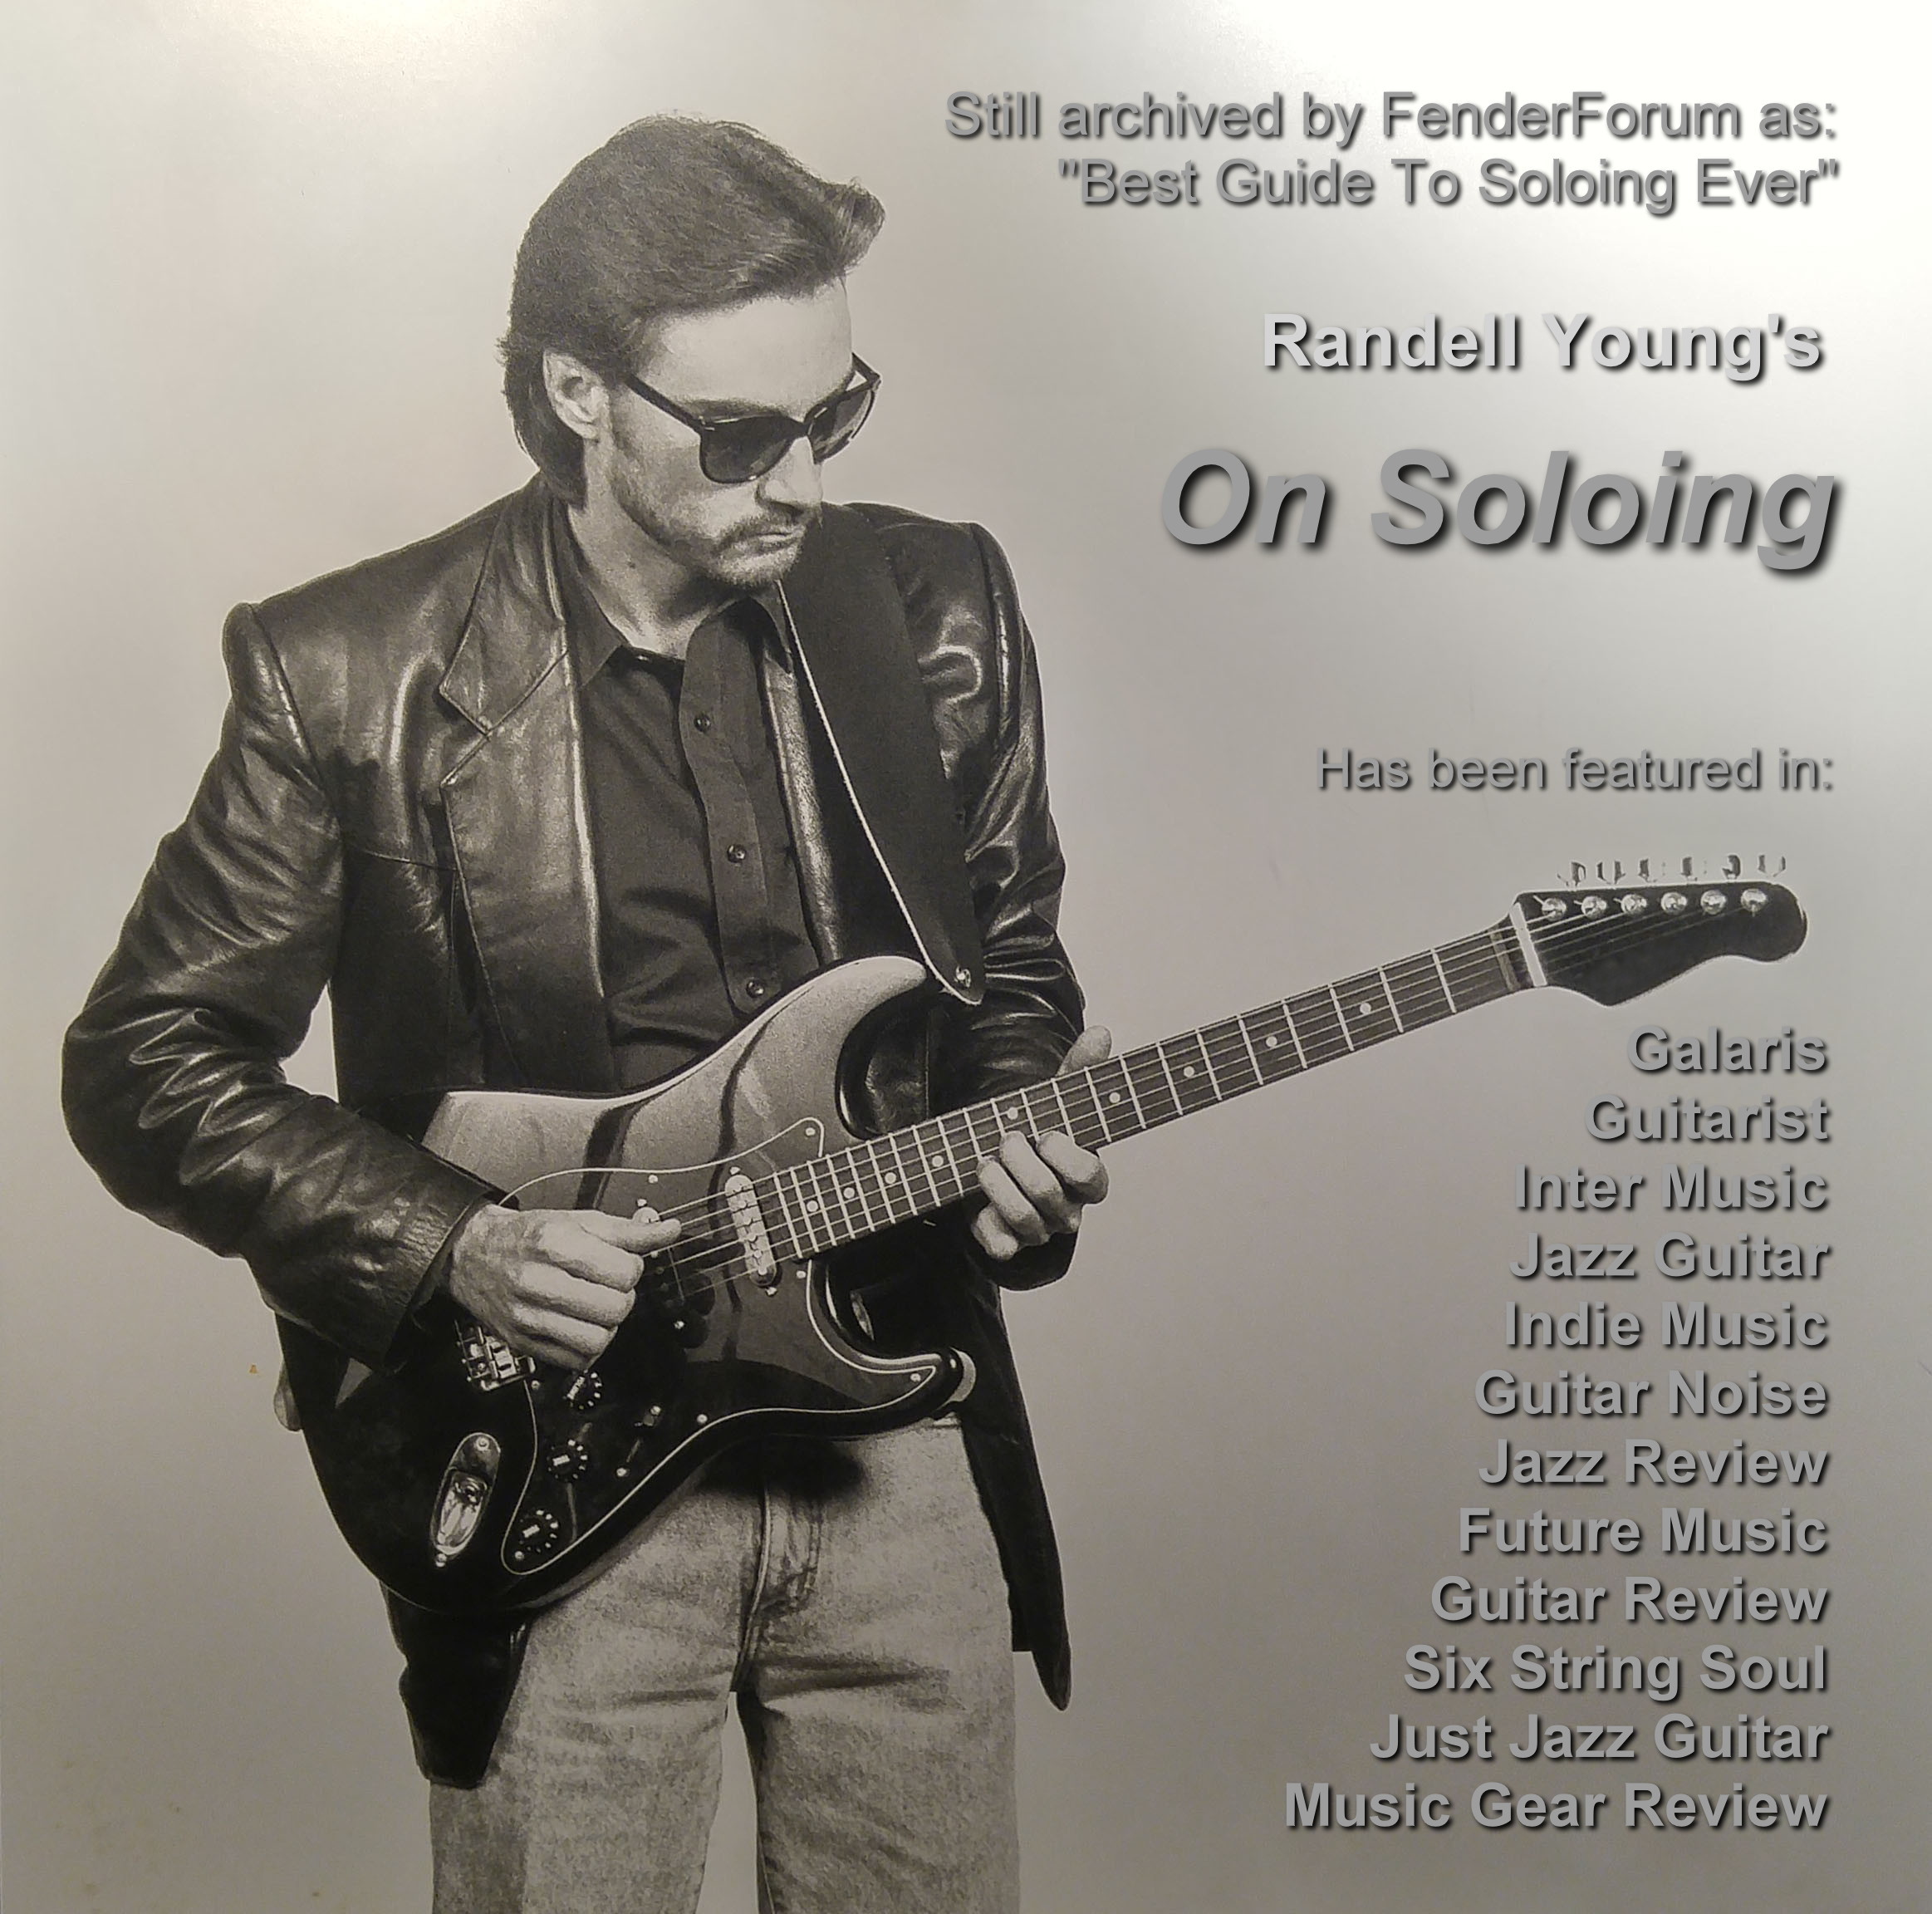 On Soloing